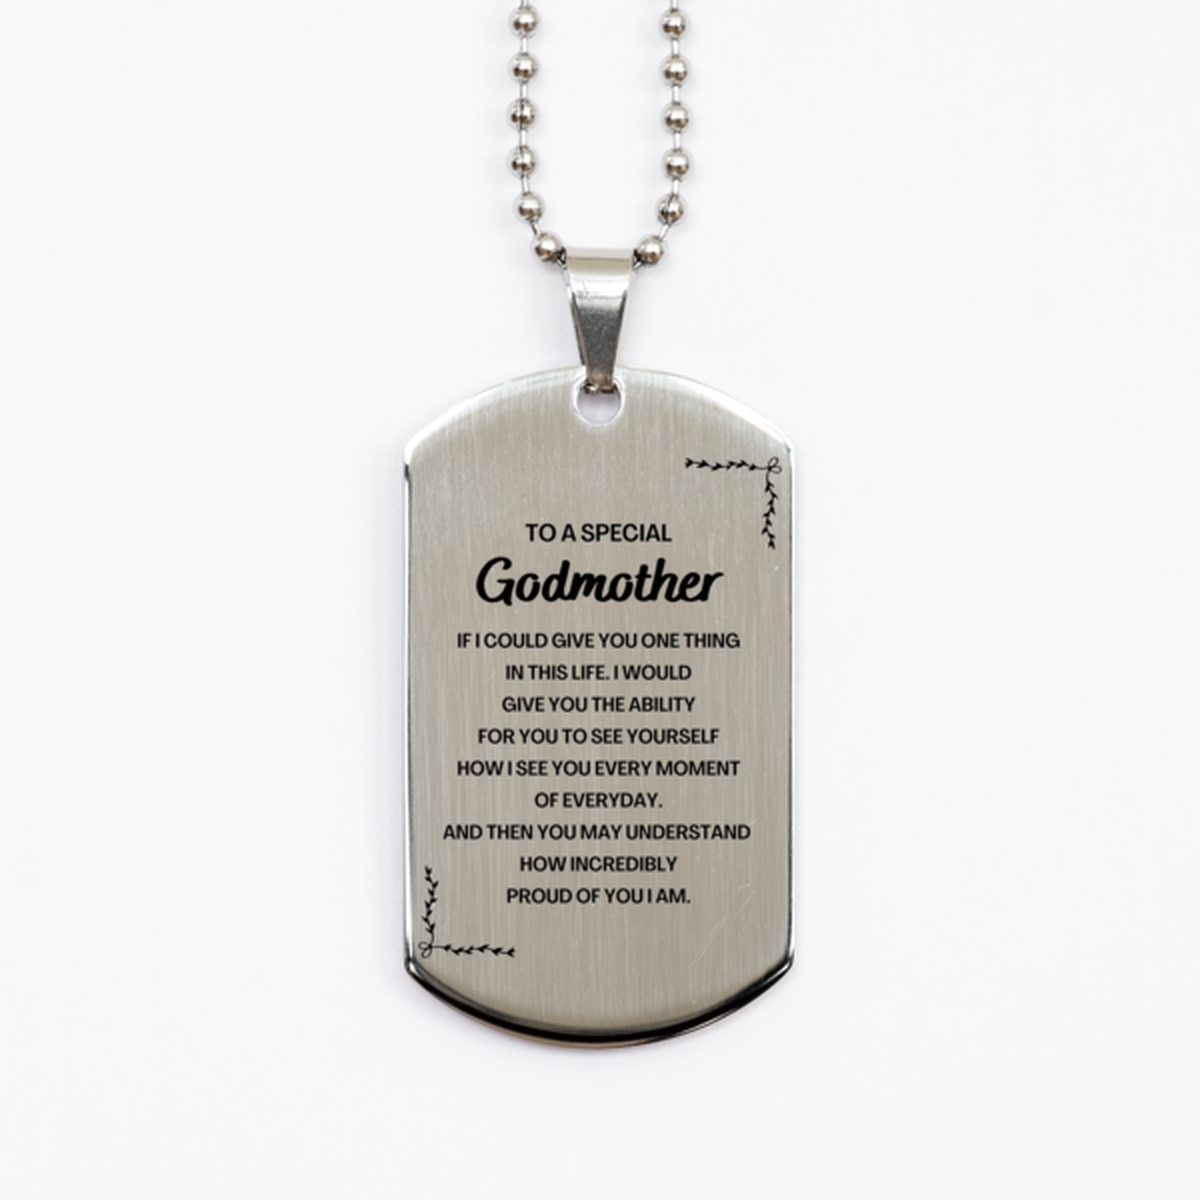 To My Godmother Silver Dog Tag, Gifts For Godmother Engraved, Inspirational Gifts for Christmas Birthday, Epic Gifts for Godmother To A Special Godmother how incredibly proud of you I am